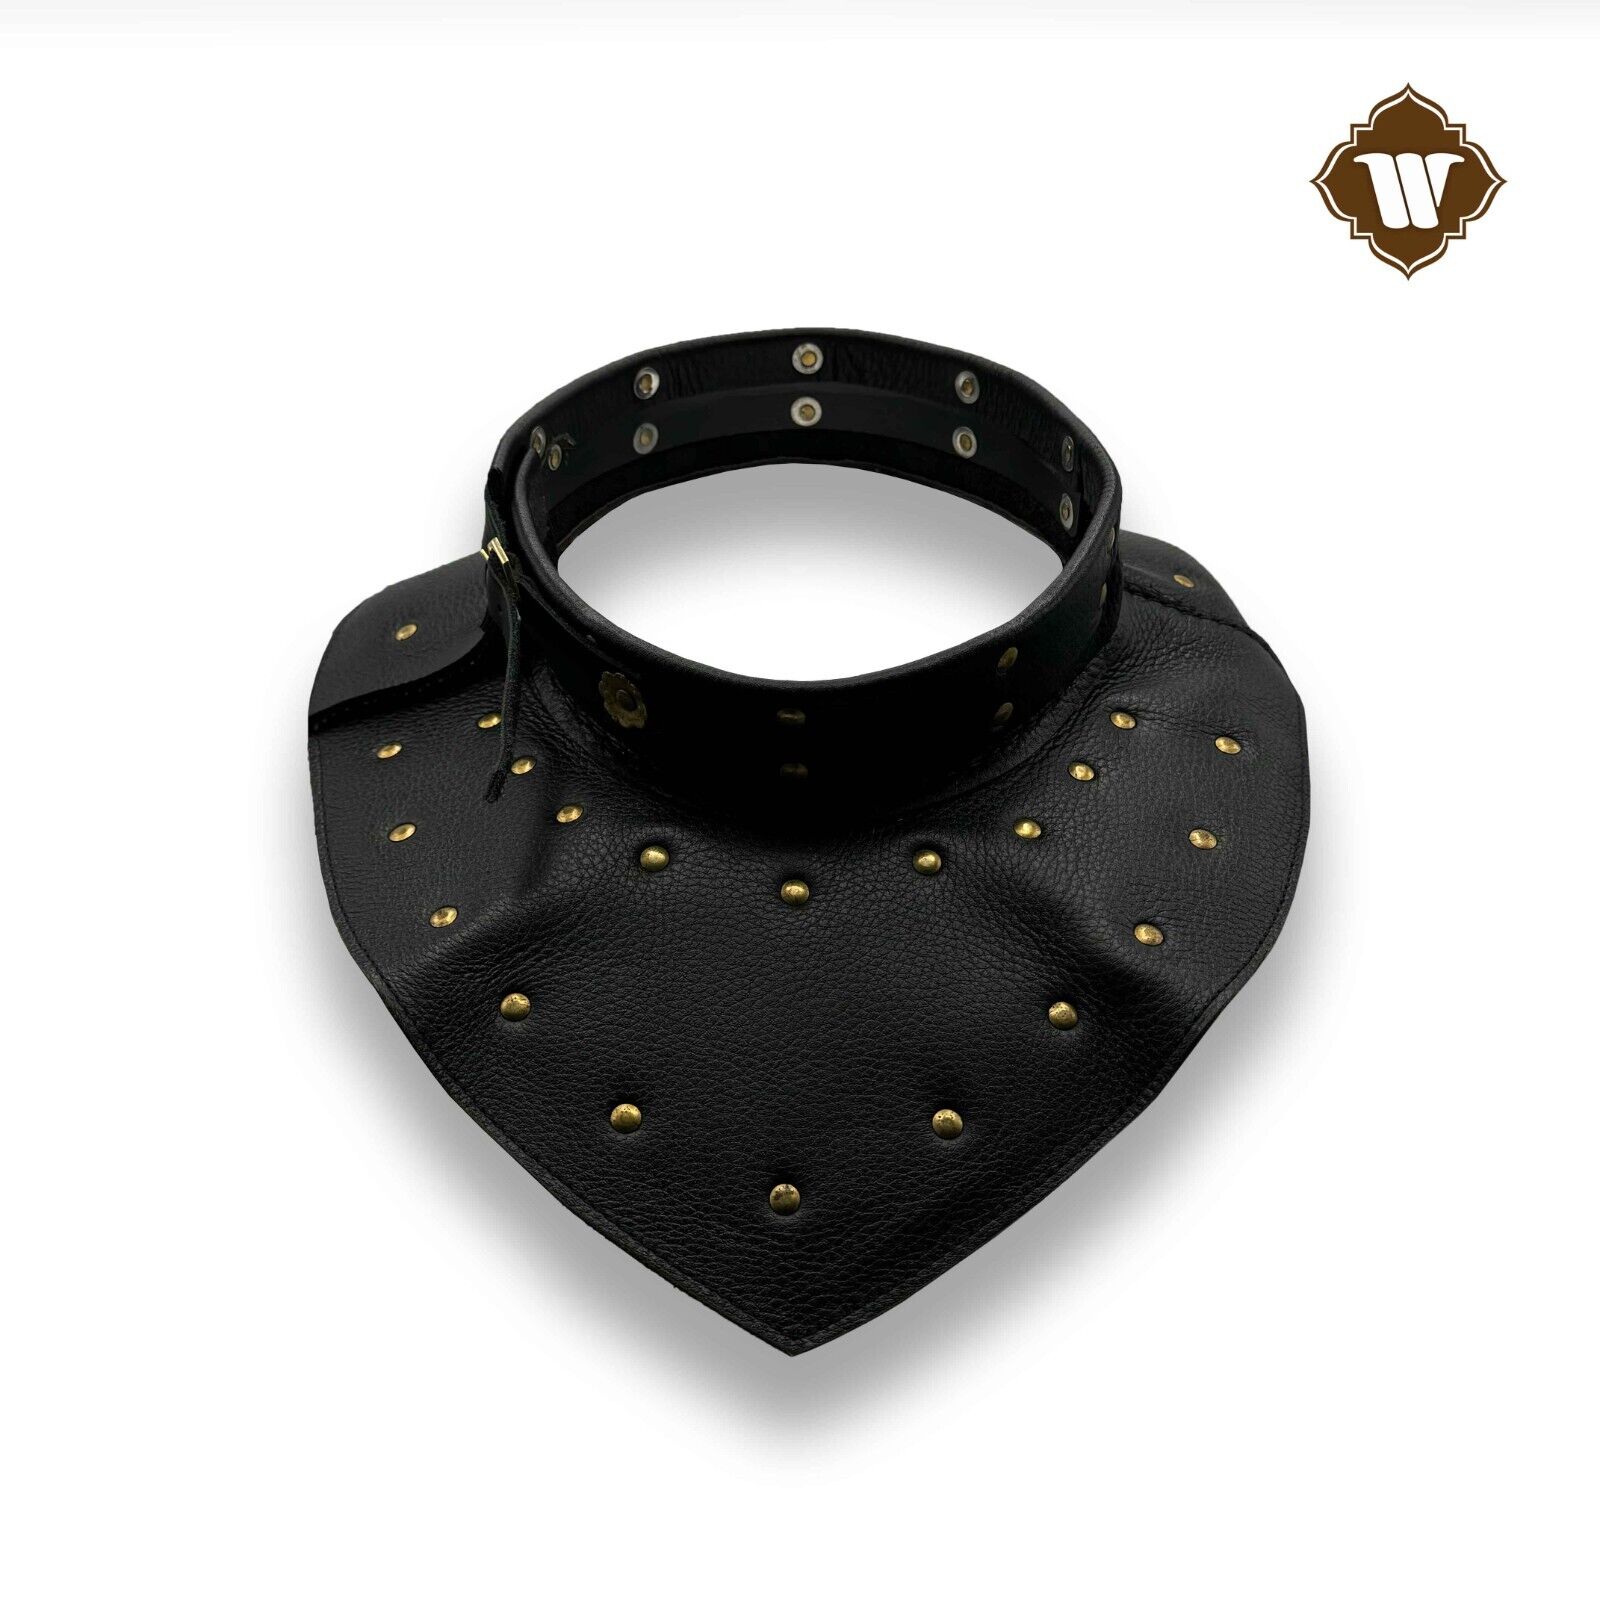 Medieval Leather Gorget with Steel Plates - HEMA/WMA Combat Neck Protection